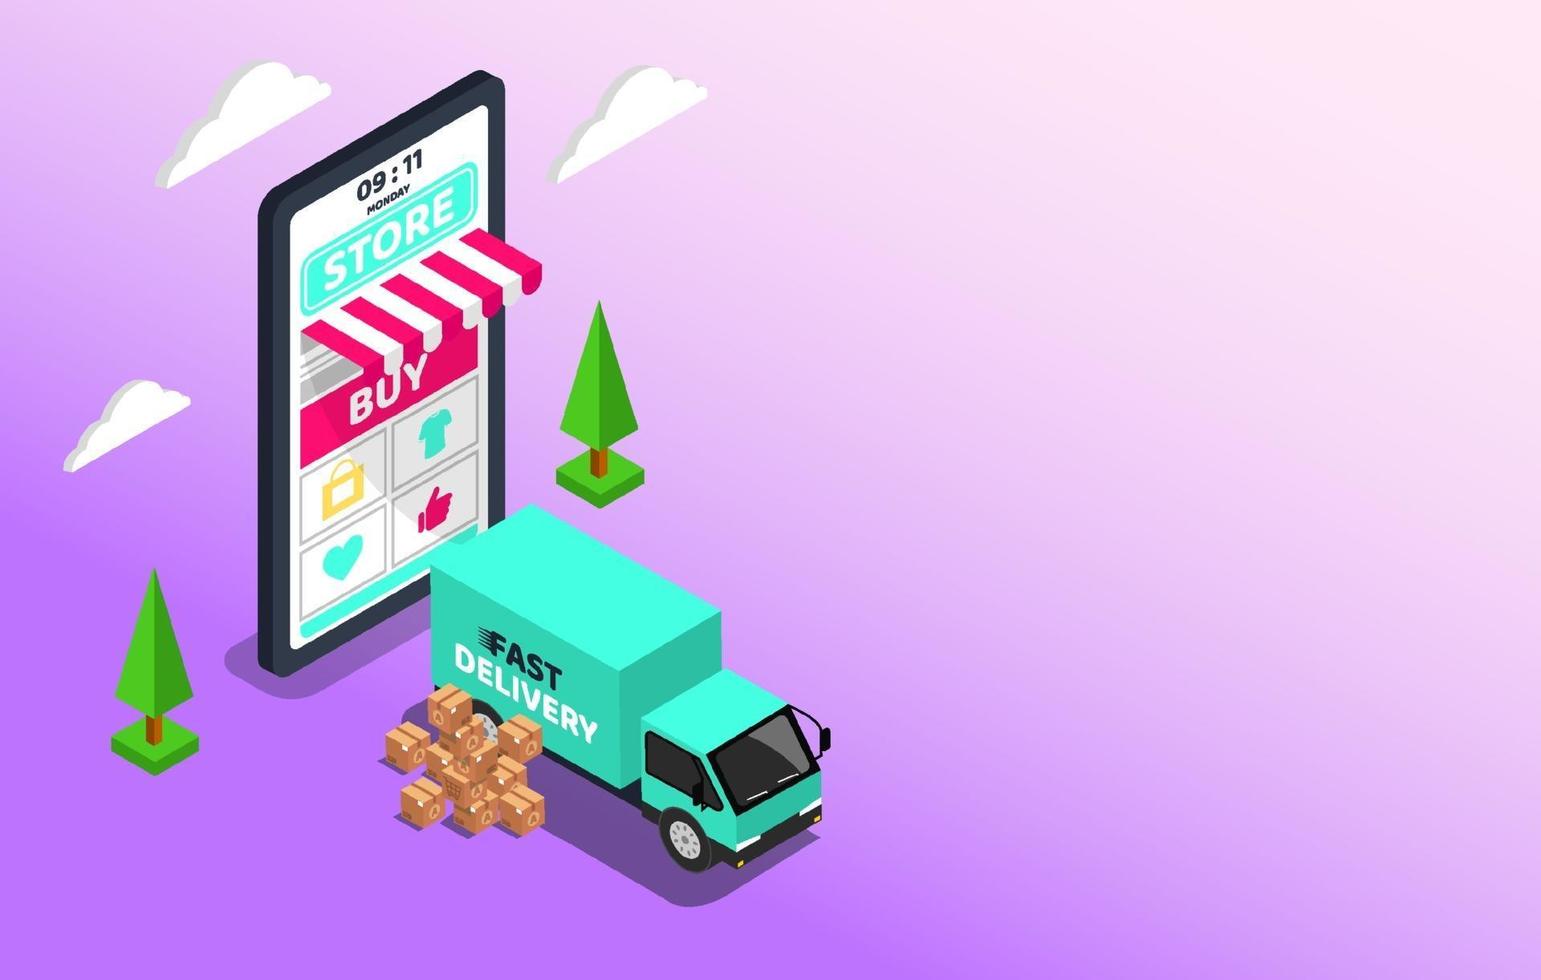 Shopping Online with Delivery service. Big smartphone digital marketing and e-commerce with Huge bill concept. Supermarket in device online store. Vector illustration